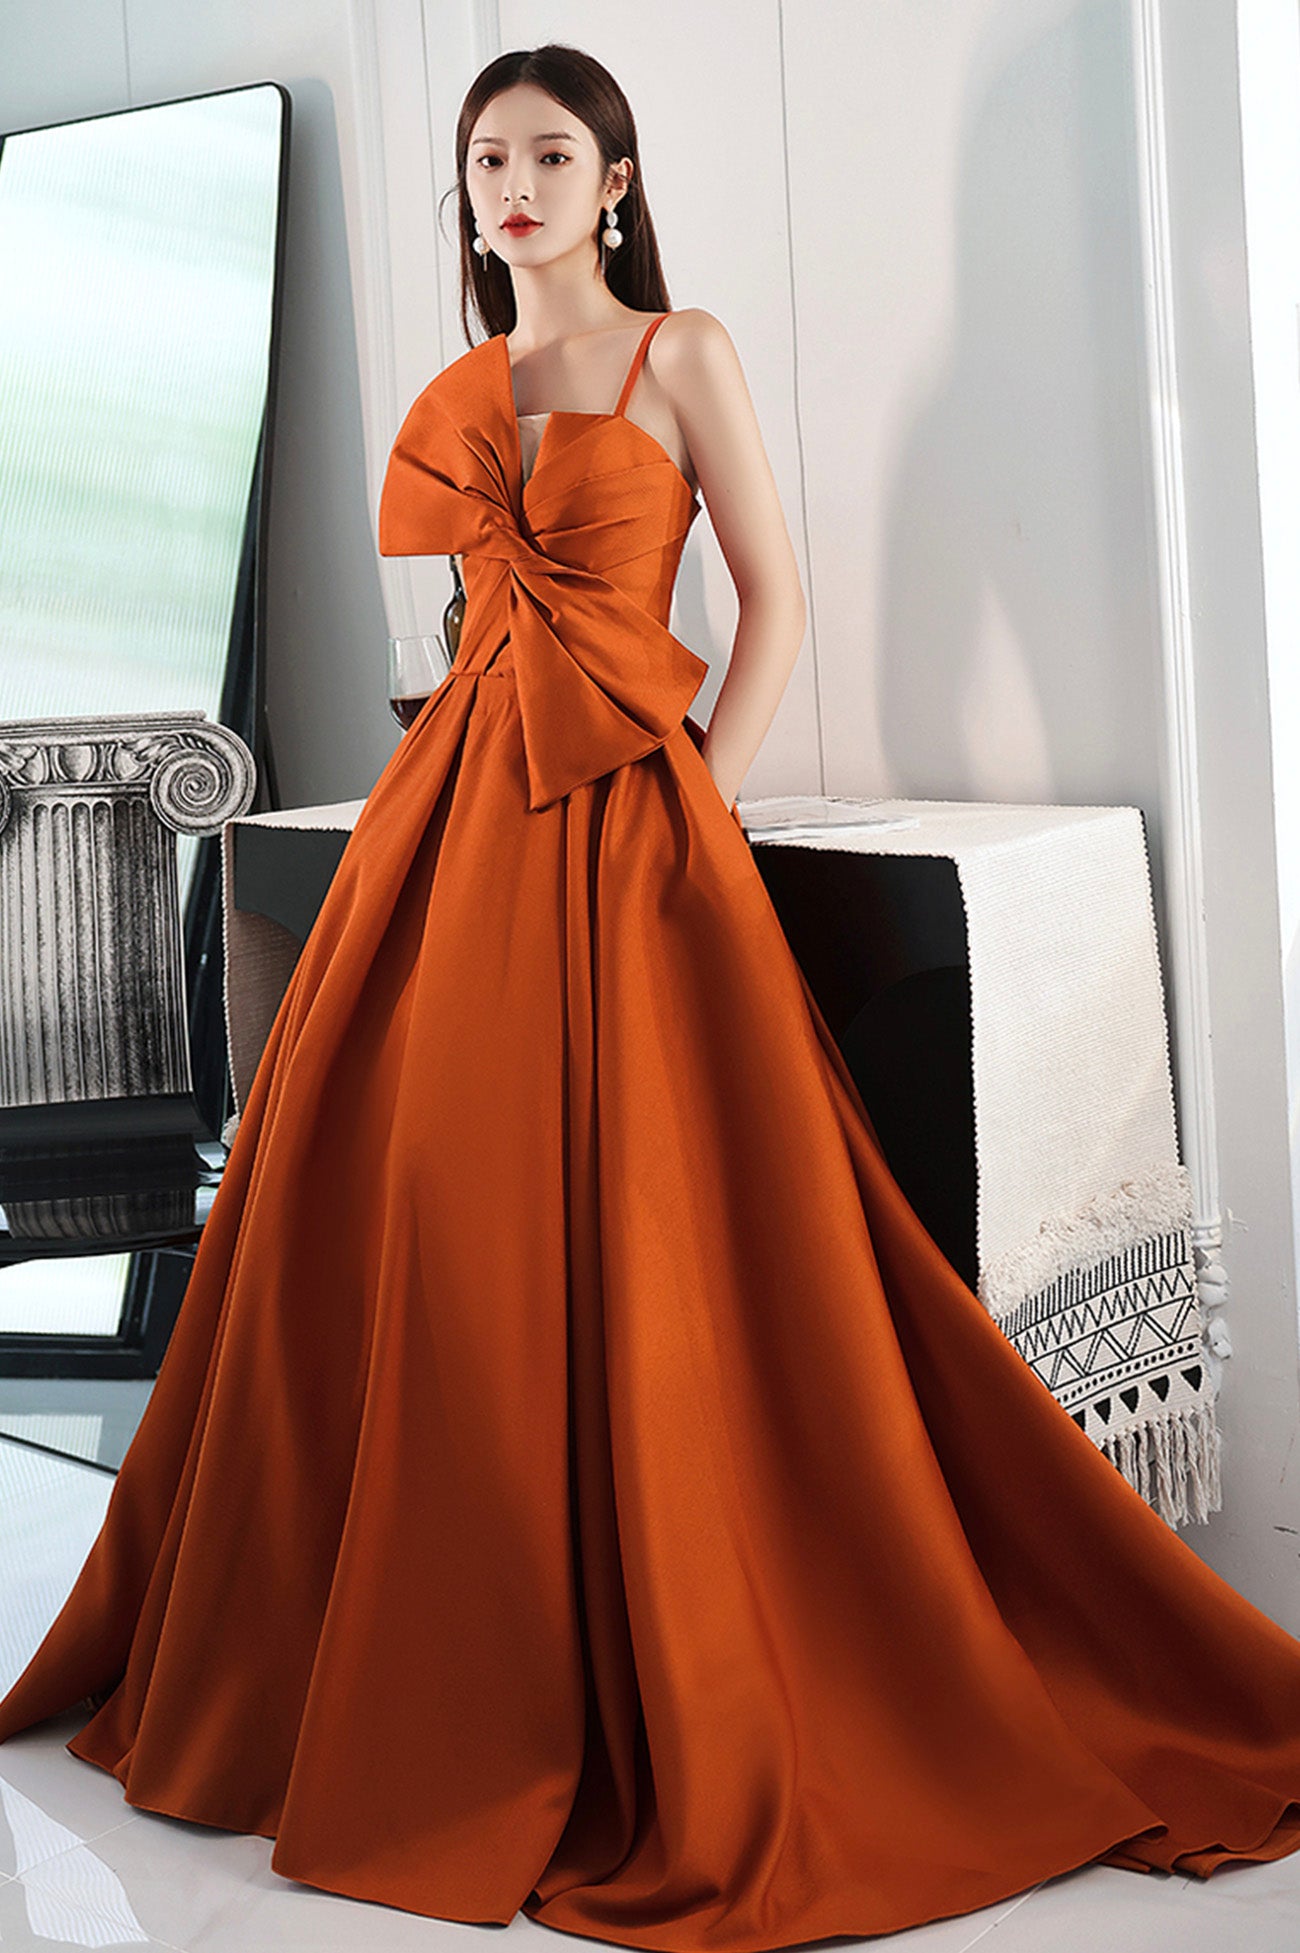 Orange Satin Long A-Line Prom Dress, Chic Evening Dress with Bow